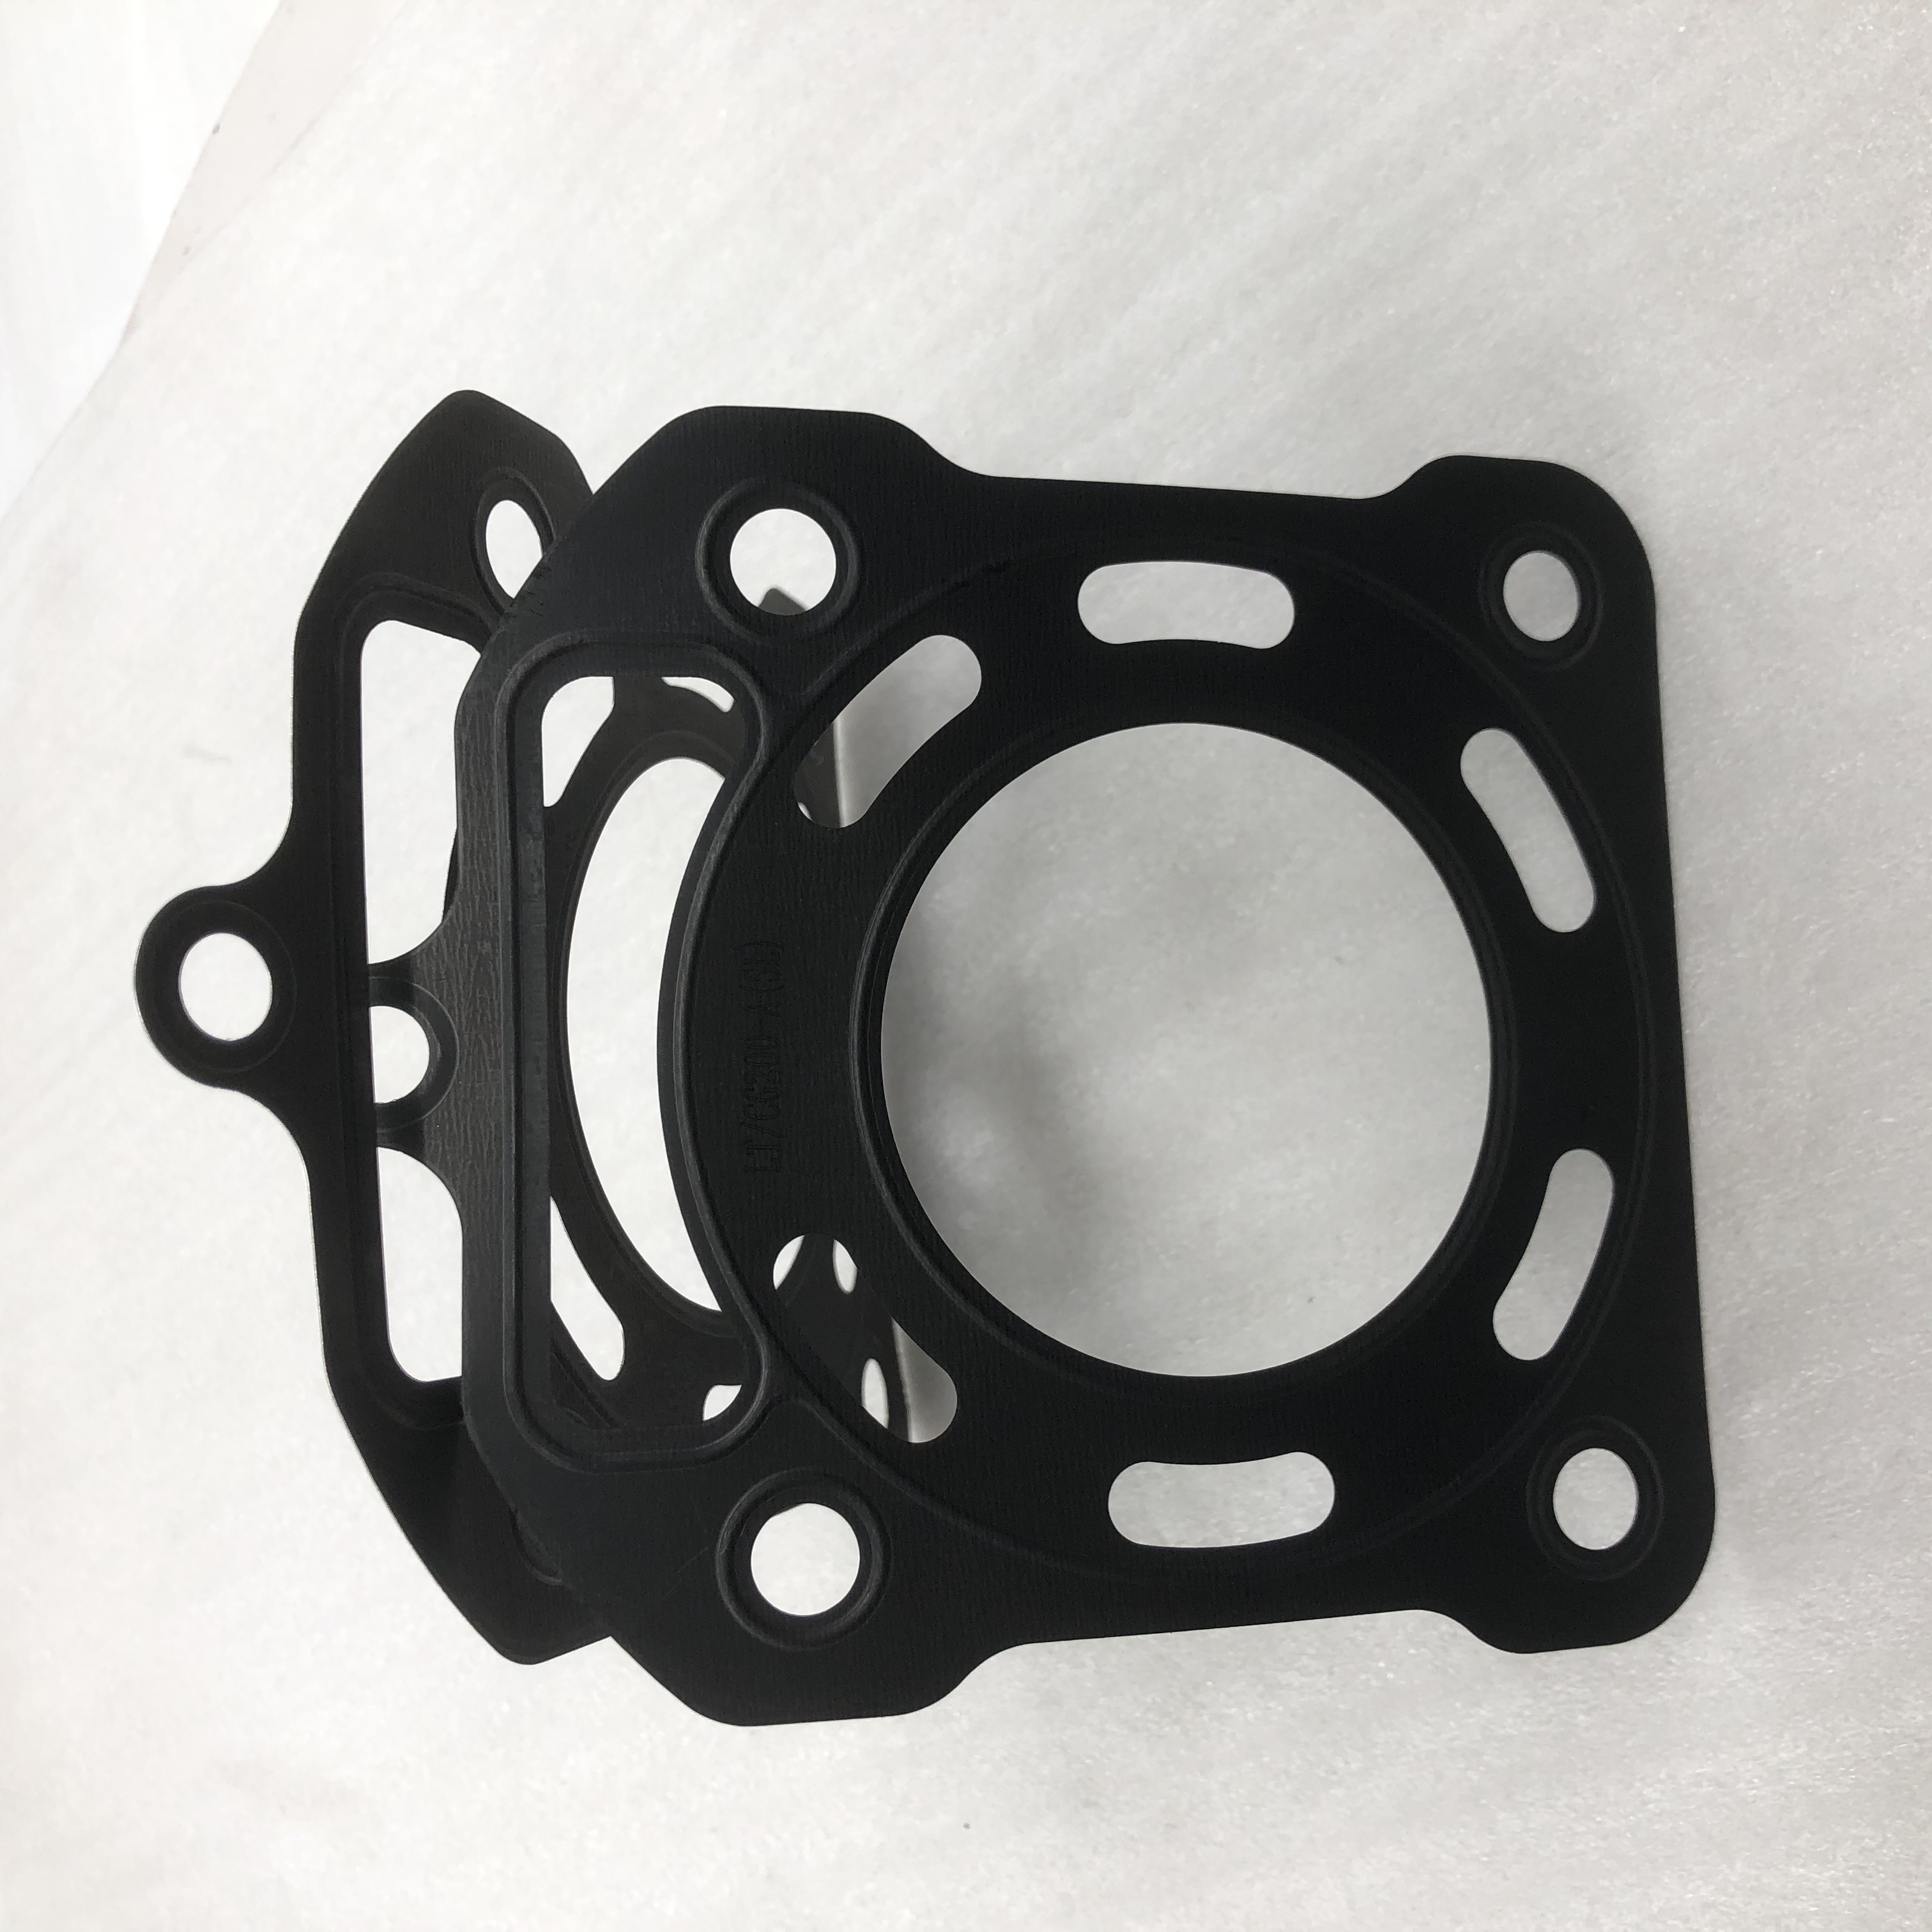 China manufacturer sale High quality Wholesale cg200cc water engine Cylinder gasket motorcycle engine assembly spare parts